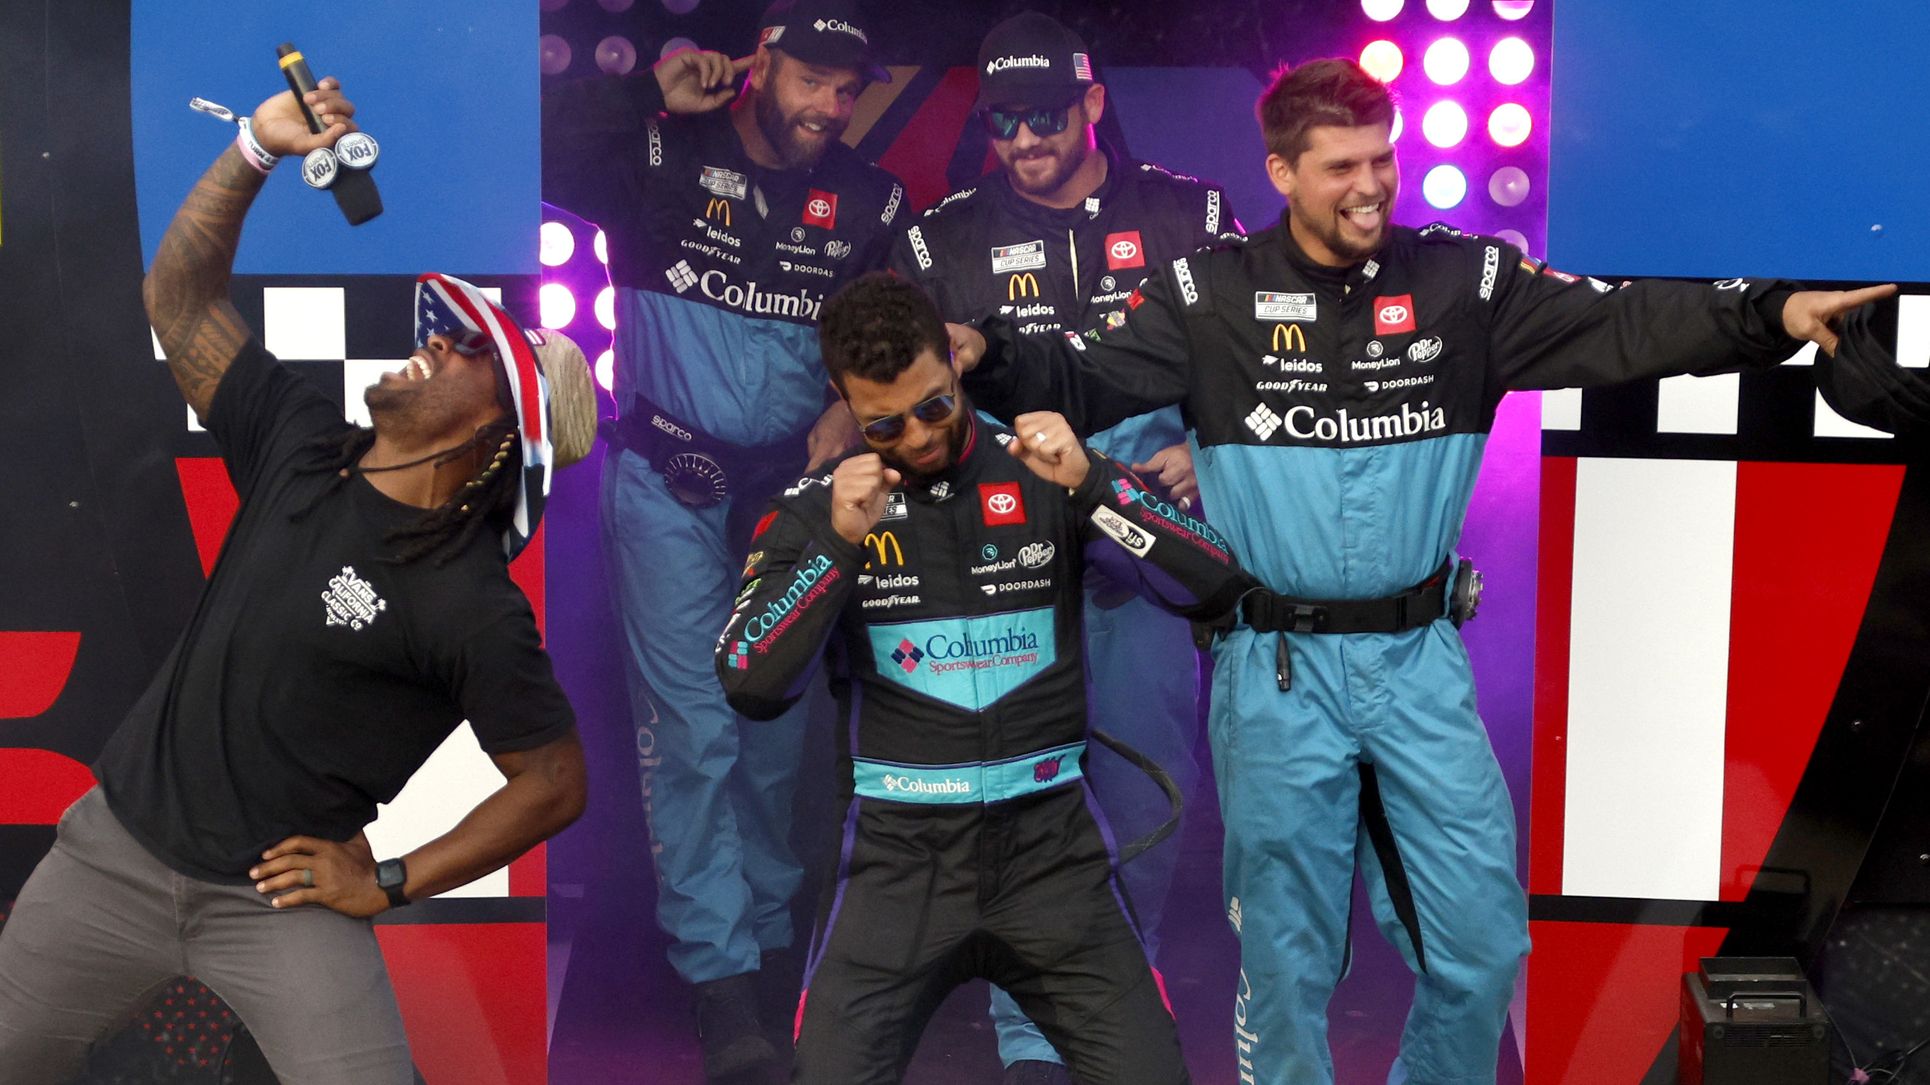 Bubba Wallace walks onstage during driver intros prior to the NASCAR Cup Series All-Star Race at North Wilkesboro Speedway, seemingly mocking fans.